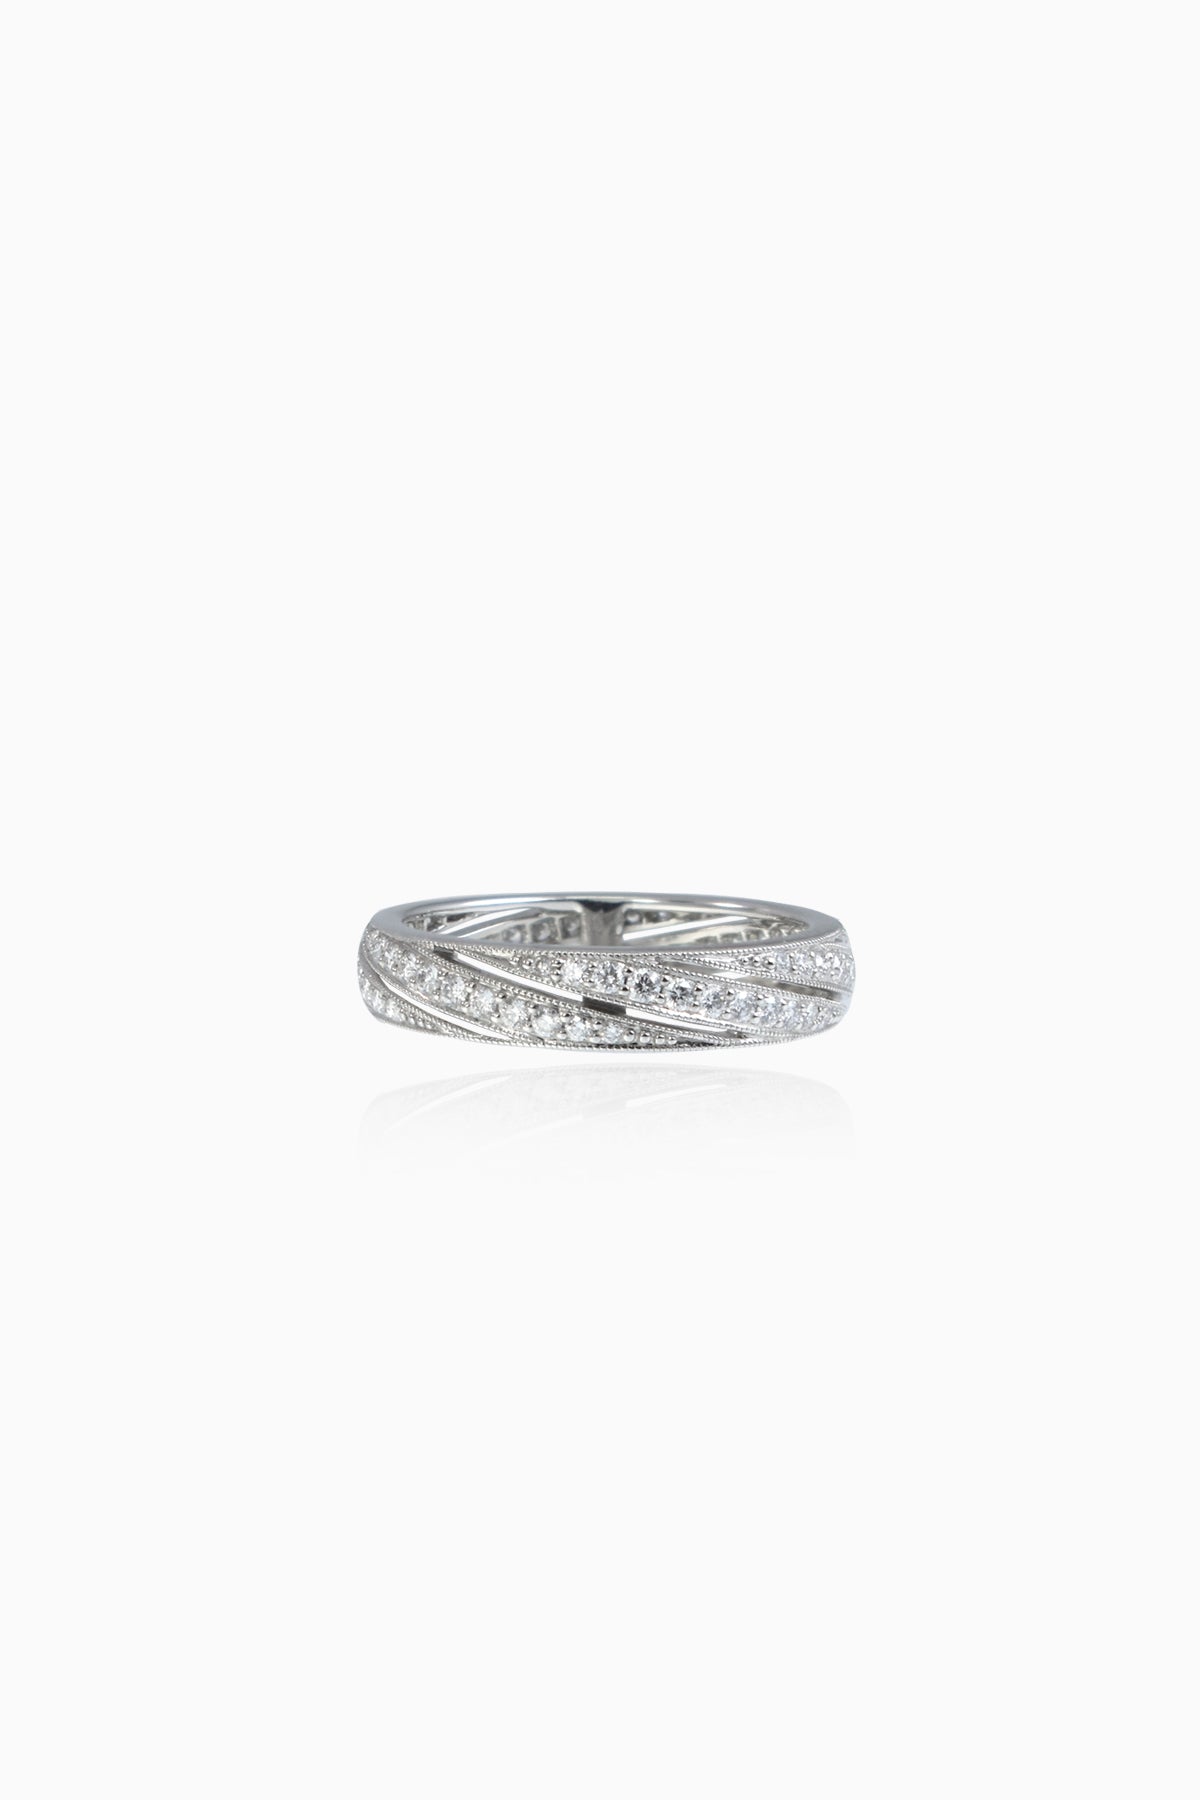 Ray of Light Band in Platinum